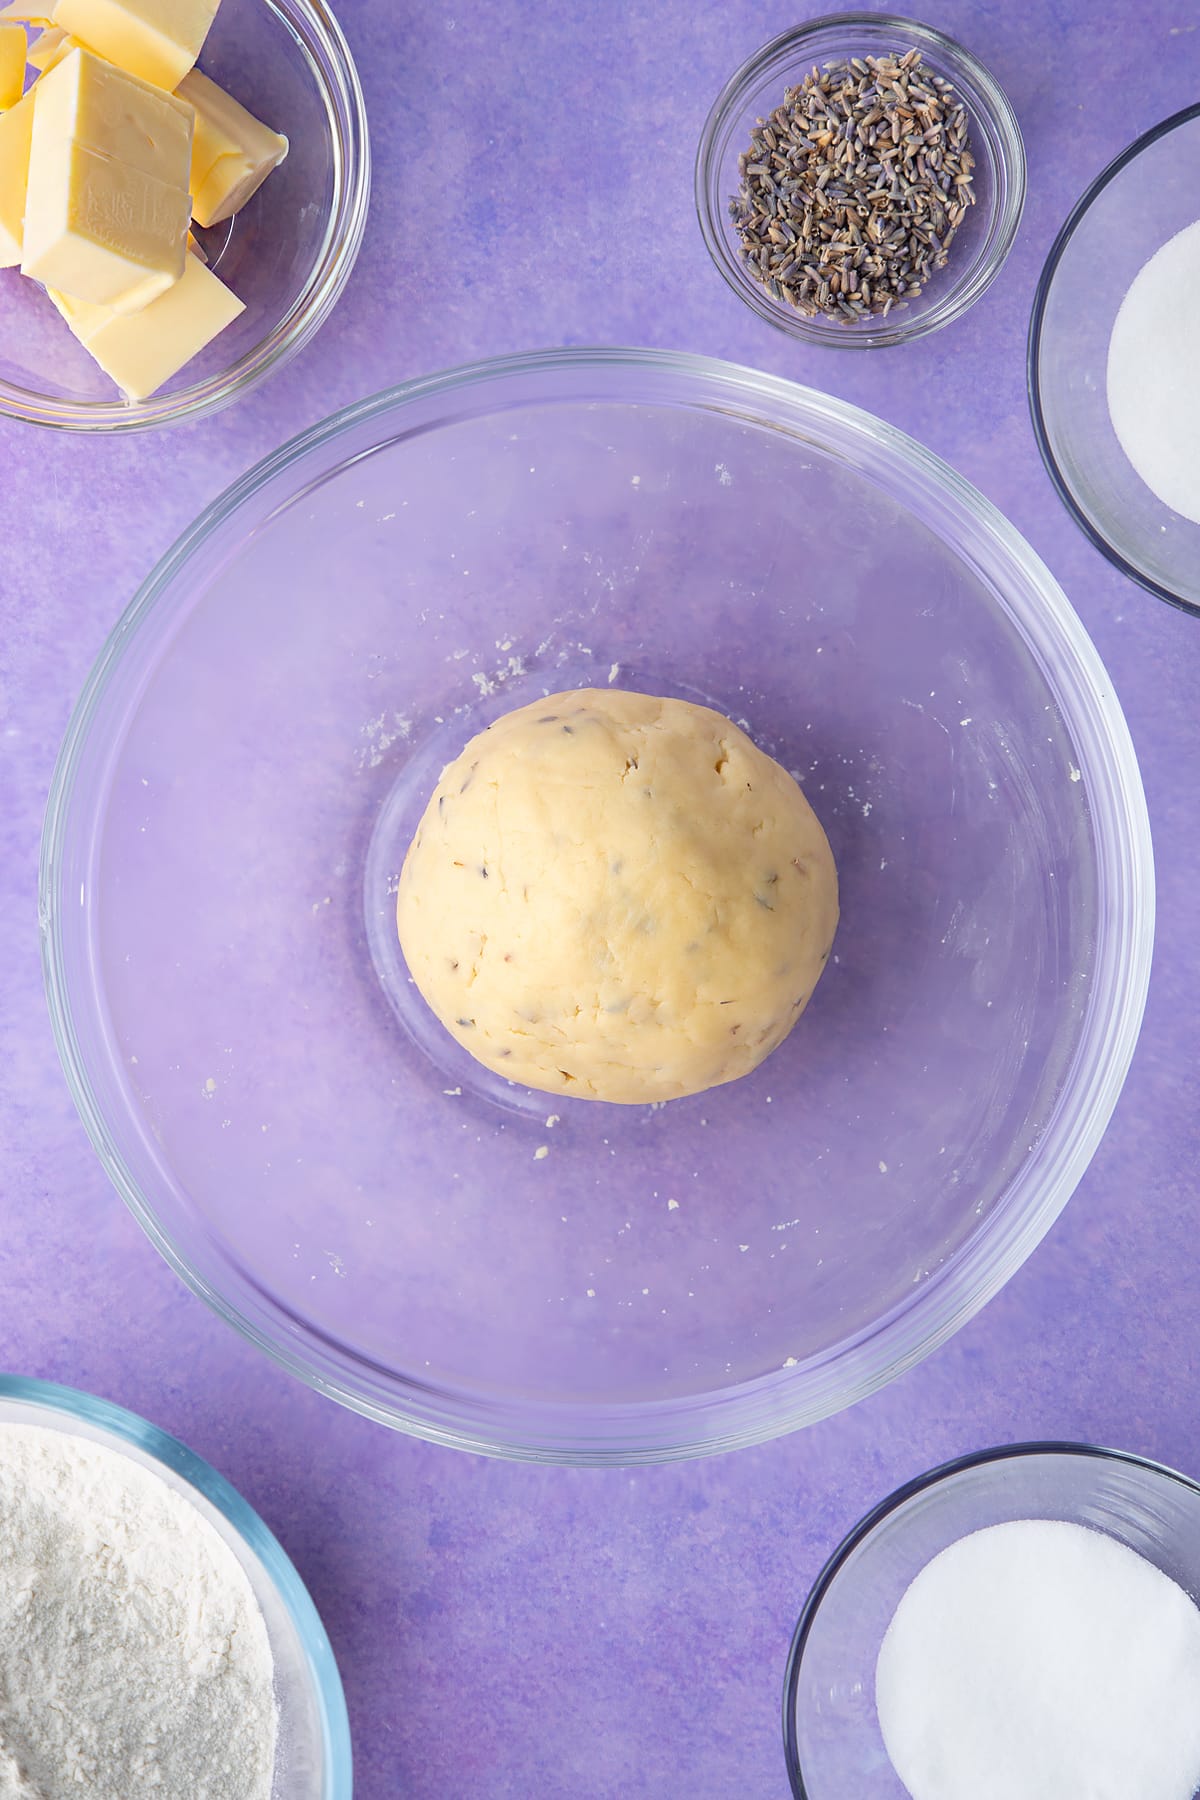 Lavender shortbread cookie dough in a ball in a mixing bowl.